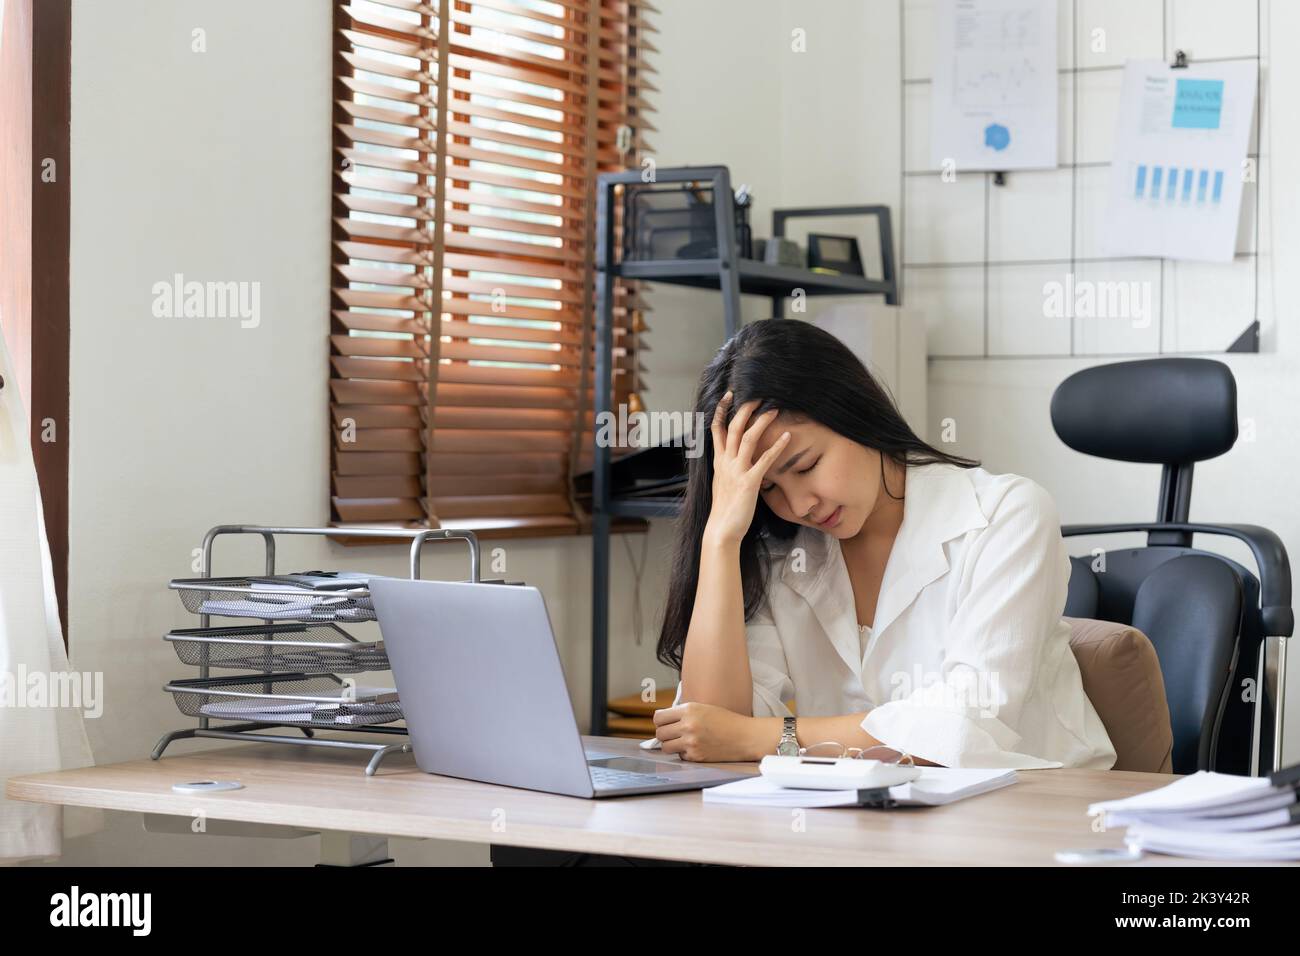 Tired business accountant woman feel headache. stressed working woman at business desk in a business office Stock Photo